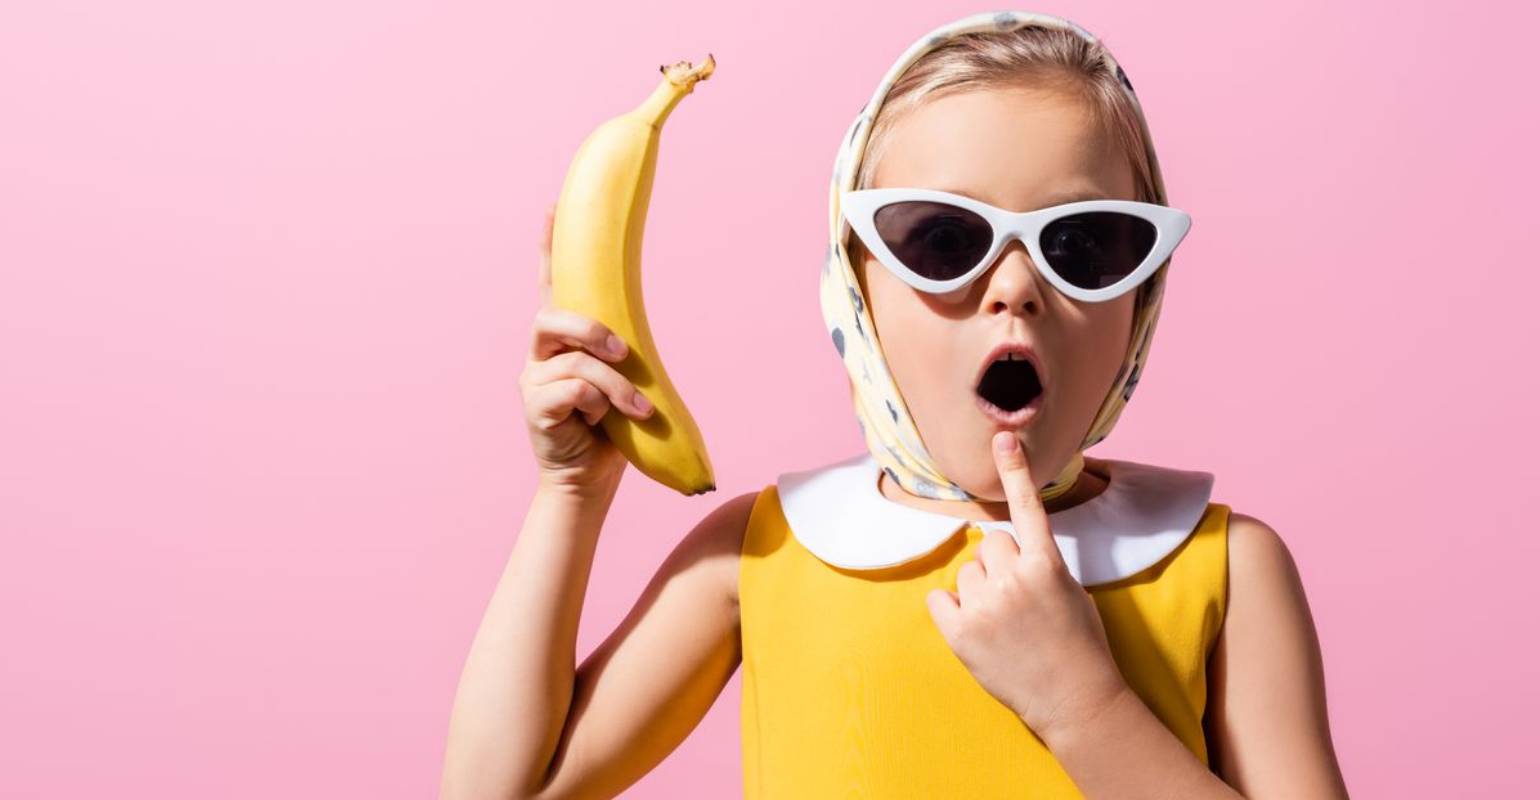 A kid in yellow outfit holding a banana